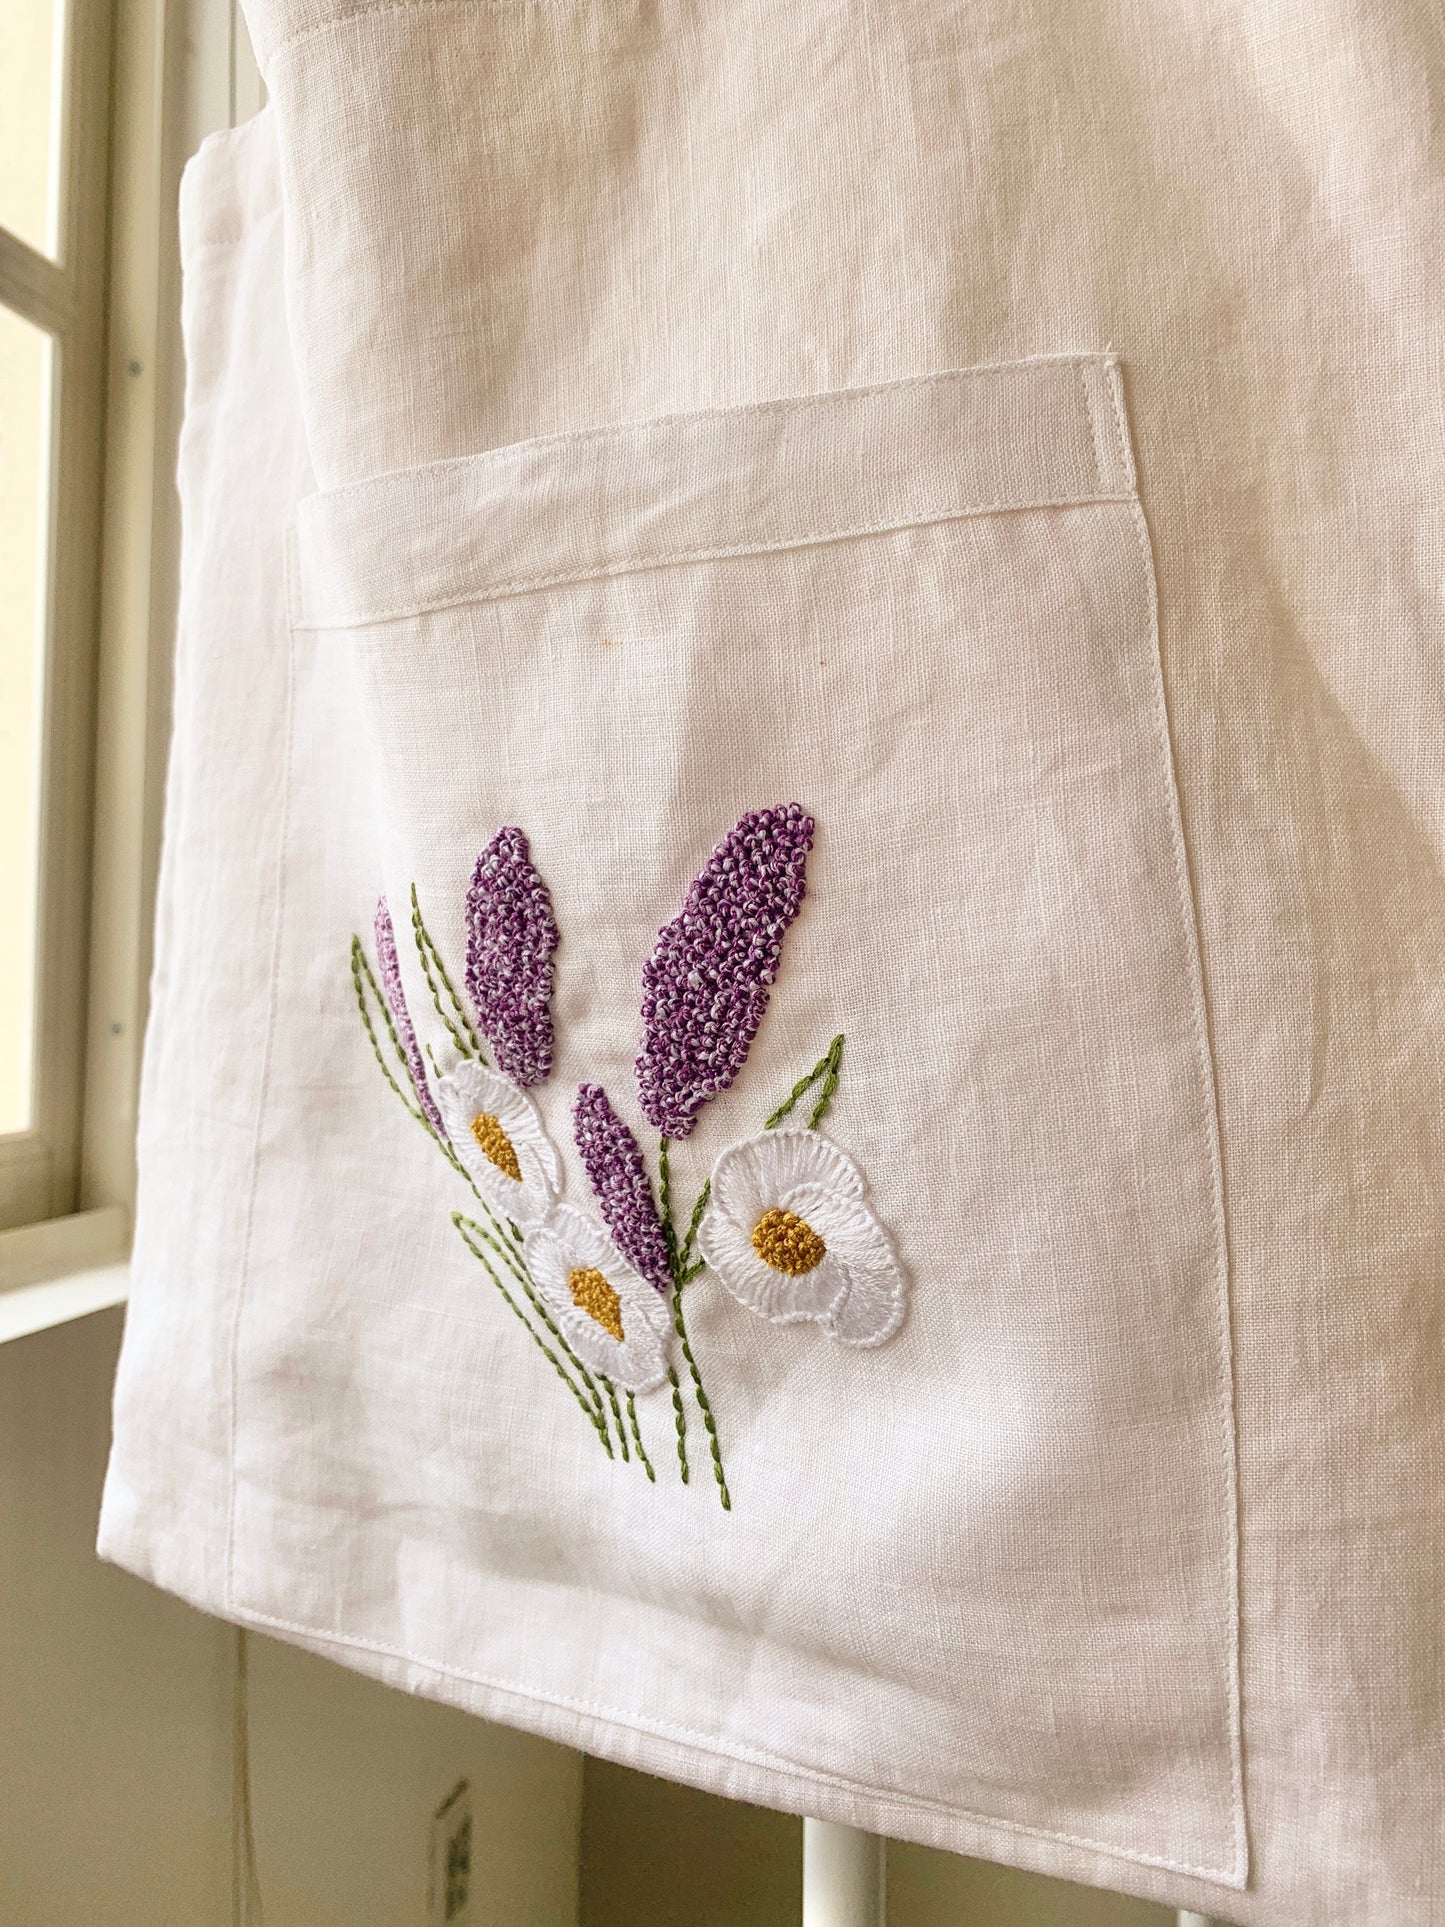 Hand embroidery linen canvas tote bag, Rose embroidery – CHURI